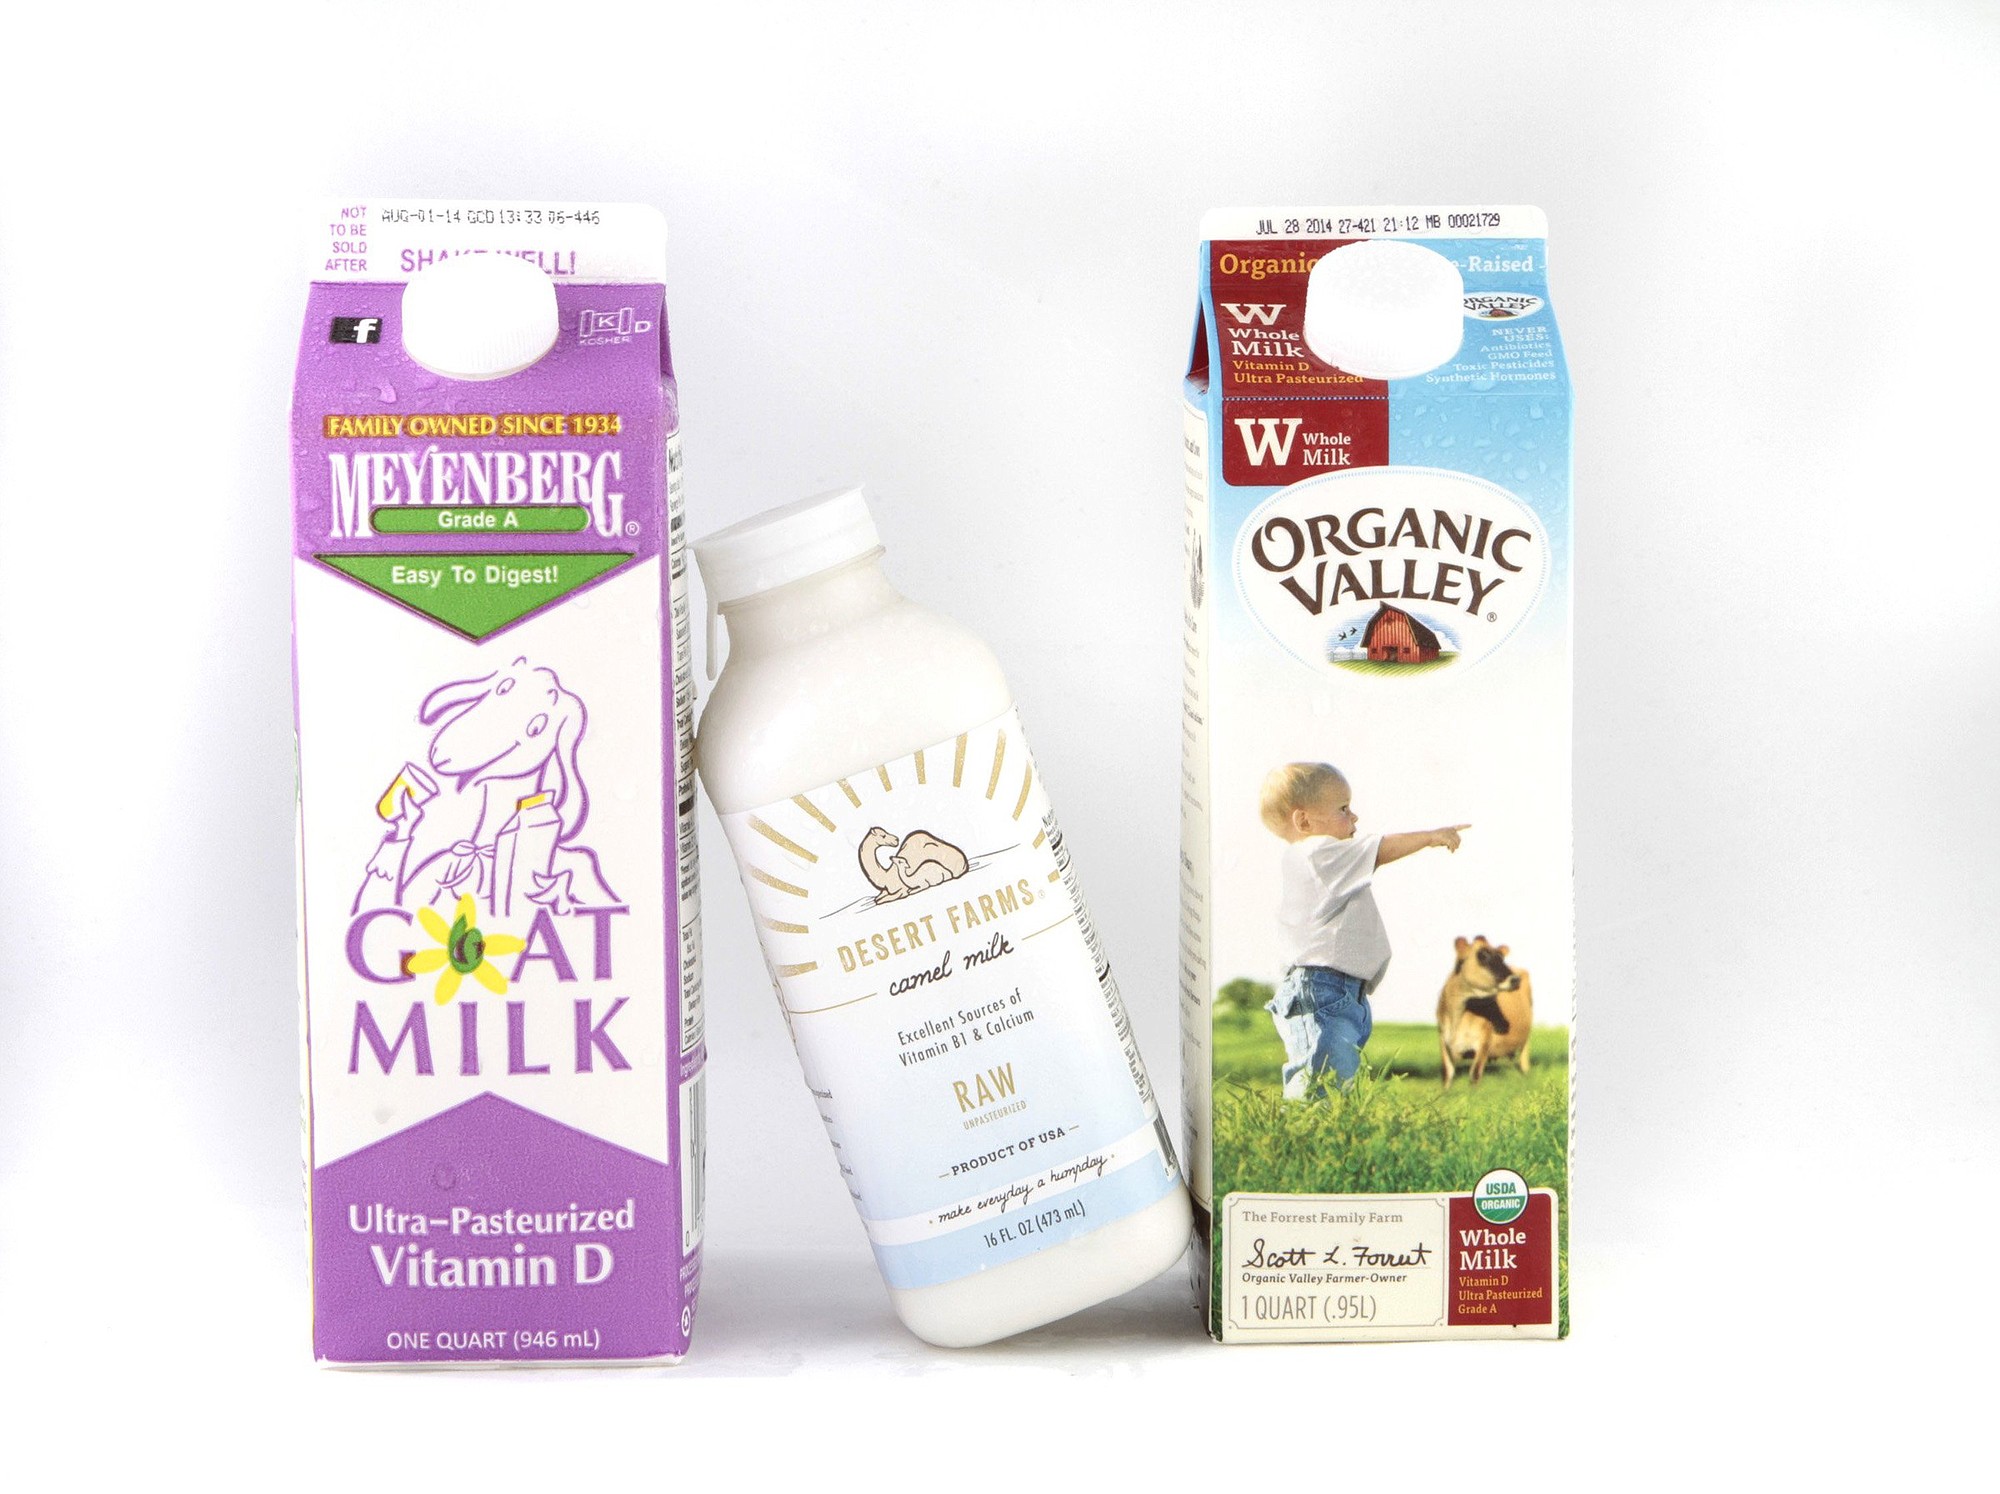 With no appreciable difference in taste from cowu2019s milk, camelu2019s milk has half the fat and about 40 fewer calories per cup. But a pint costs about $16 to $19 online.